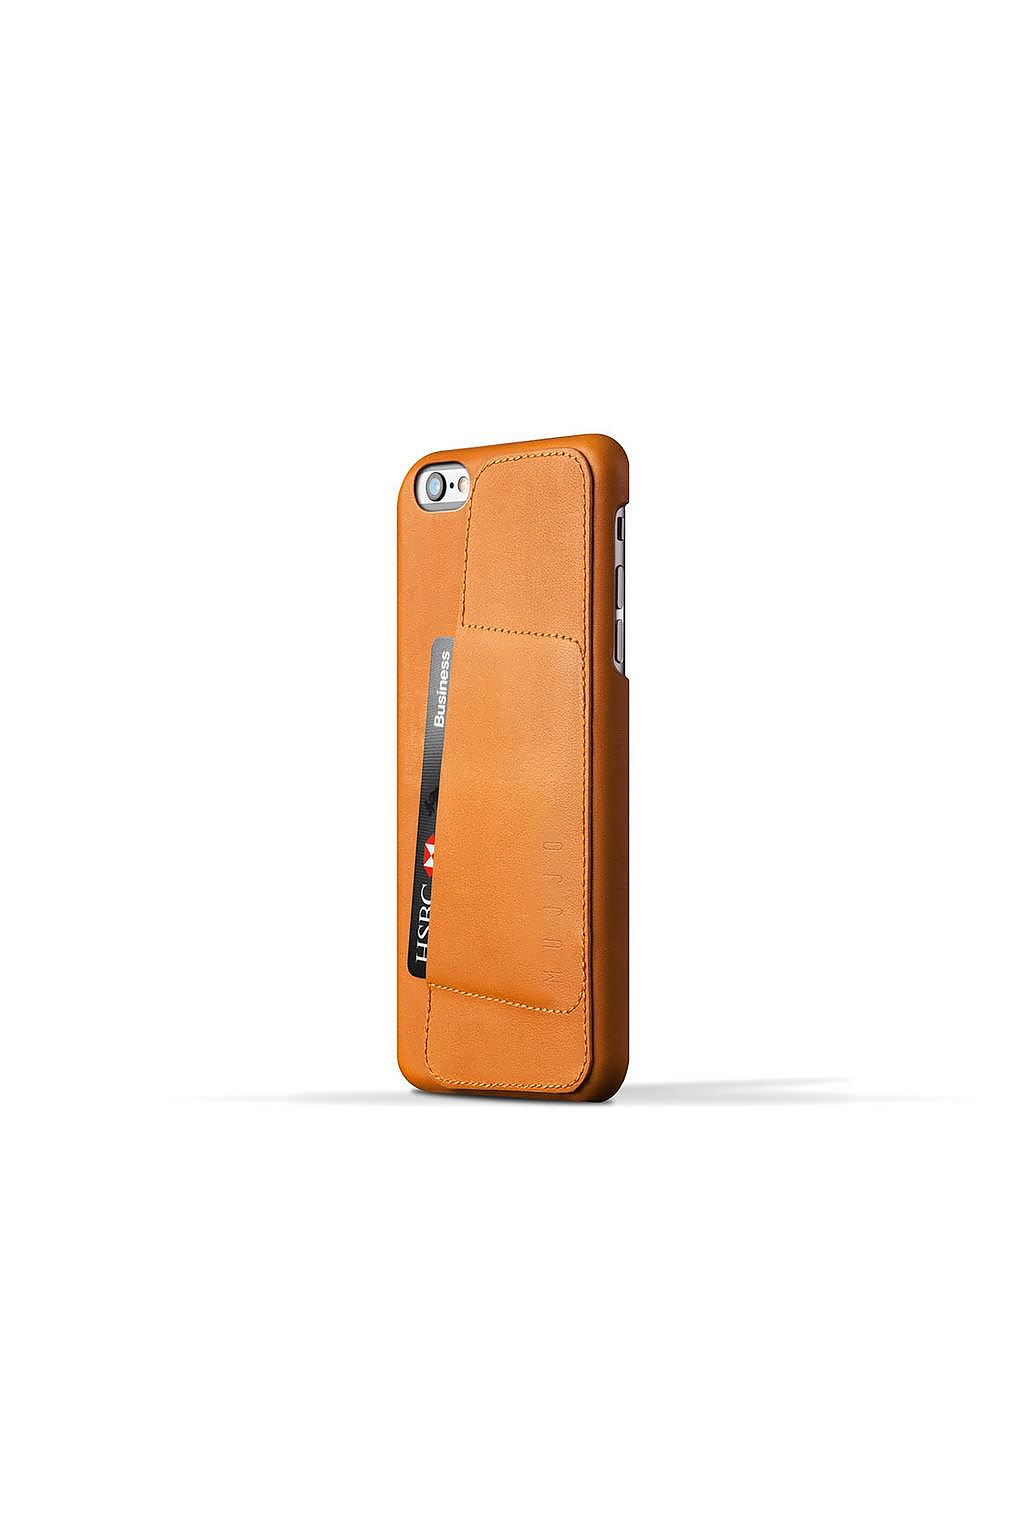 Leather Cases for iPhone 6 and iPhone 6 Plus by Mujjo.